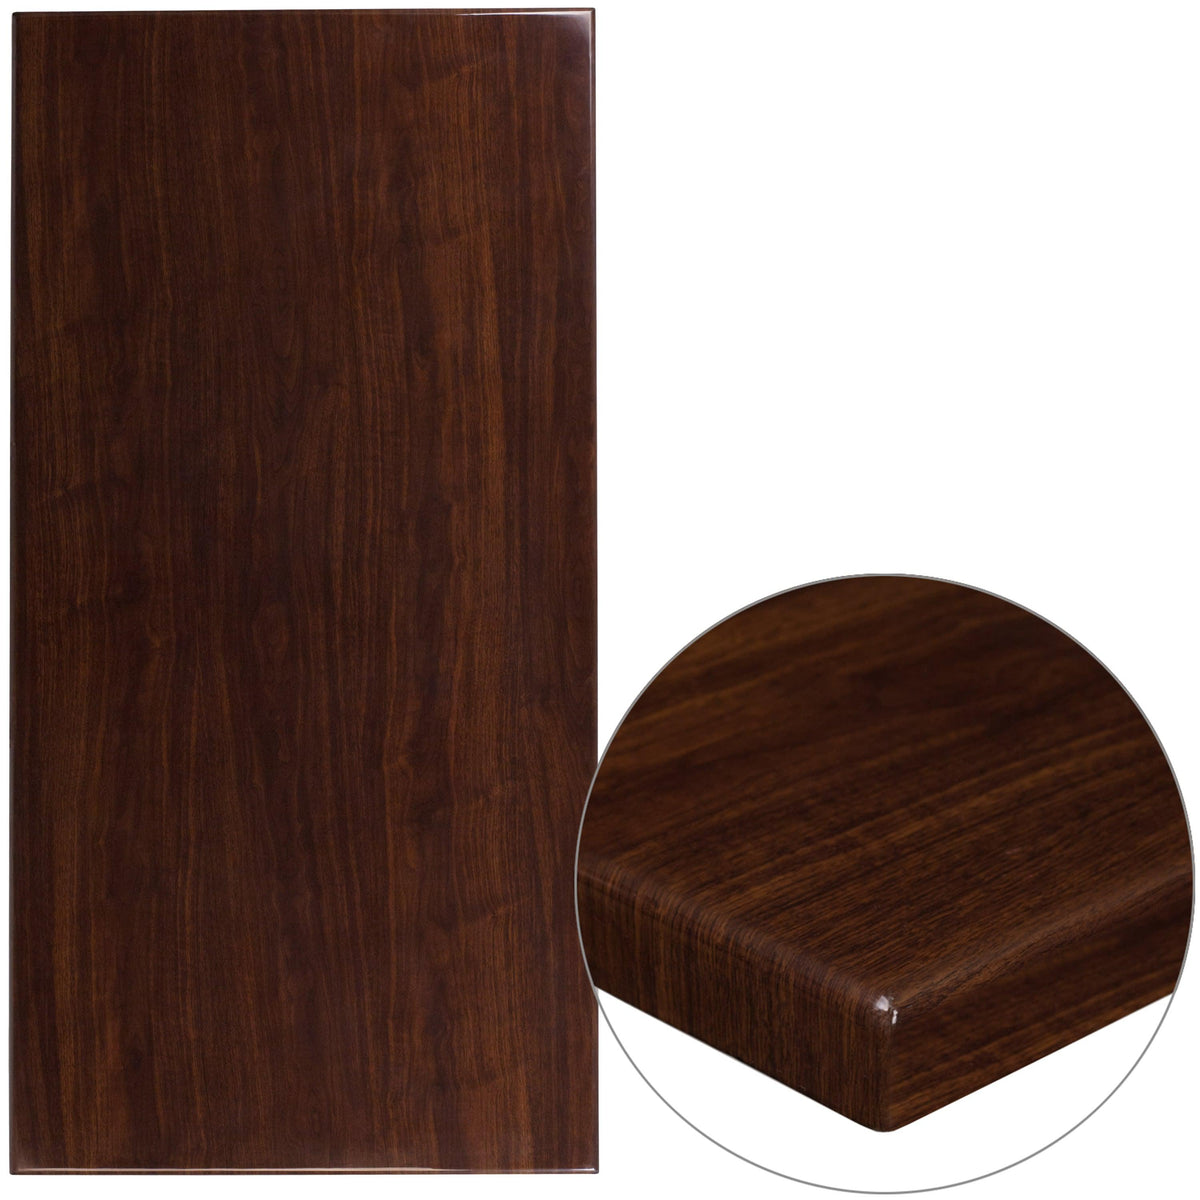 Walnut |#| 30inch x 60inch Rectangular High-Gloss Walnut Resin Table Top with 2inch Thick Edge